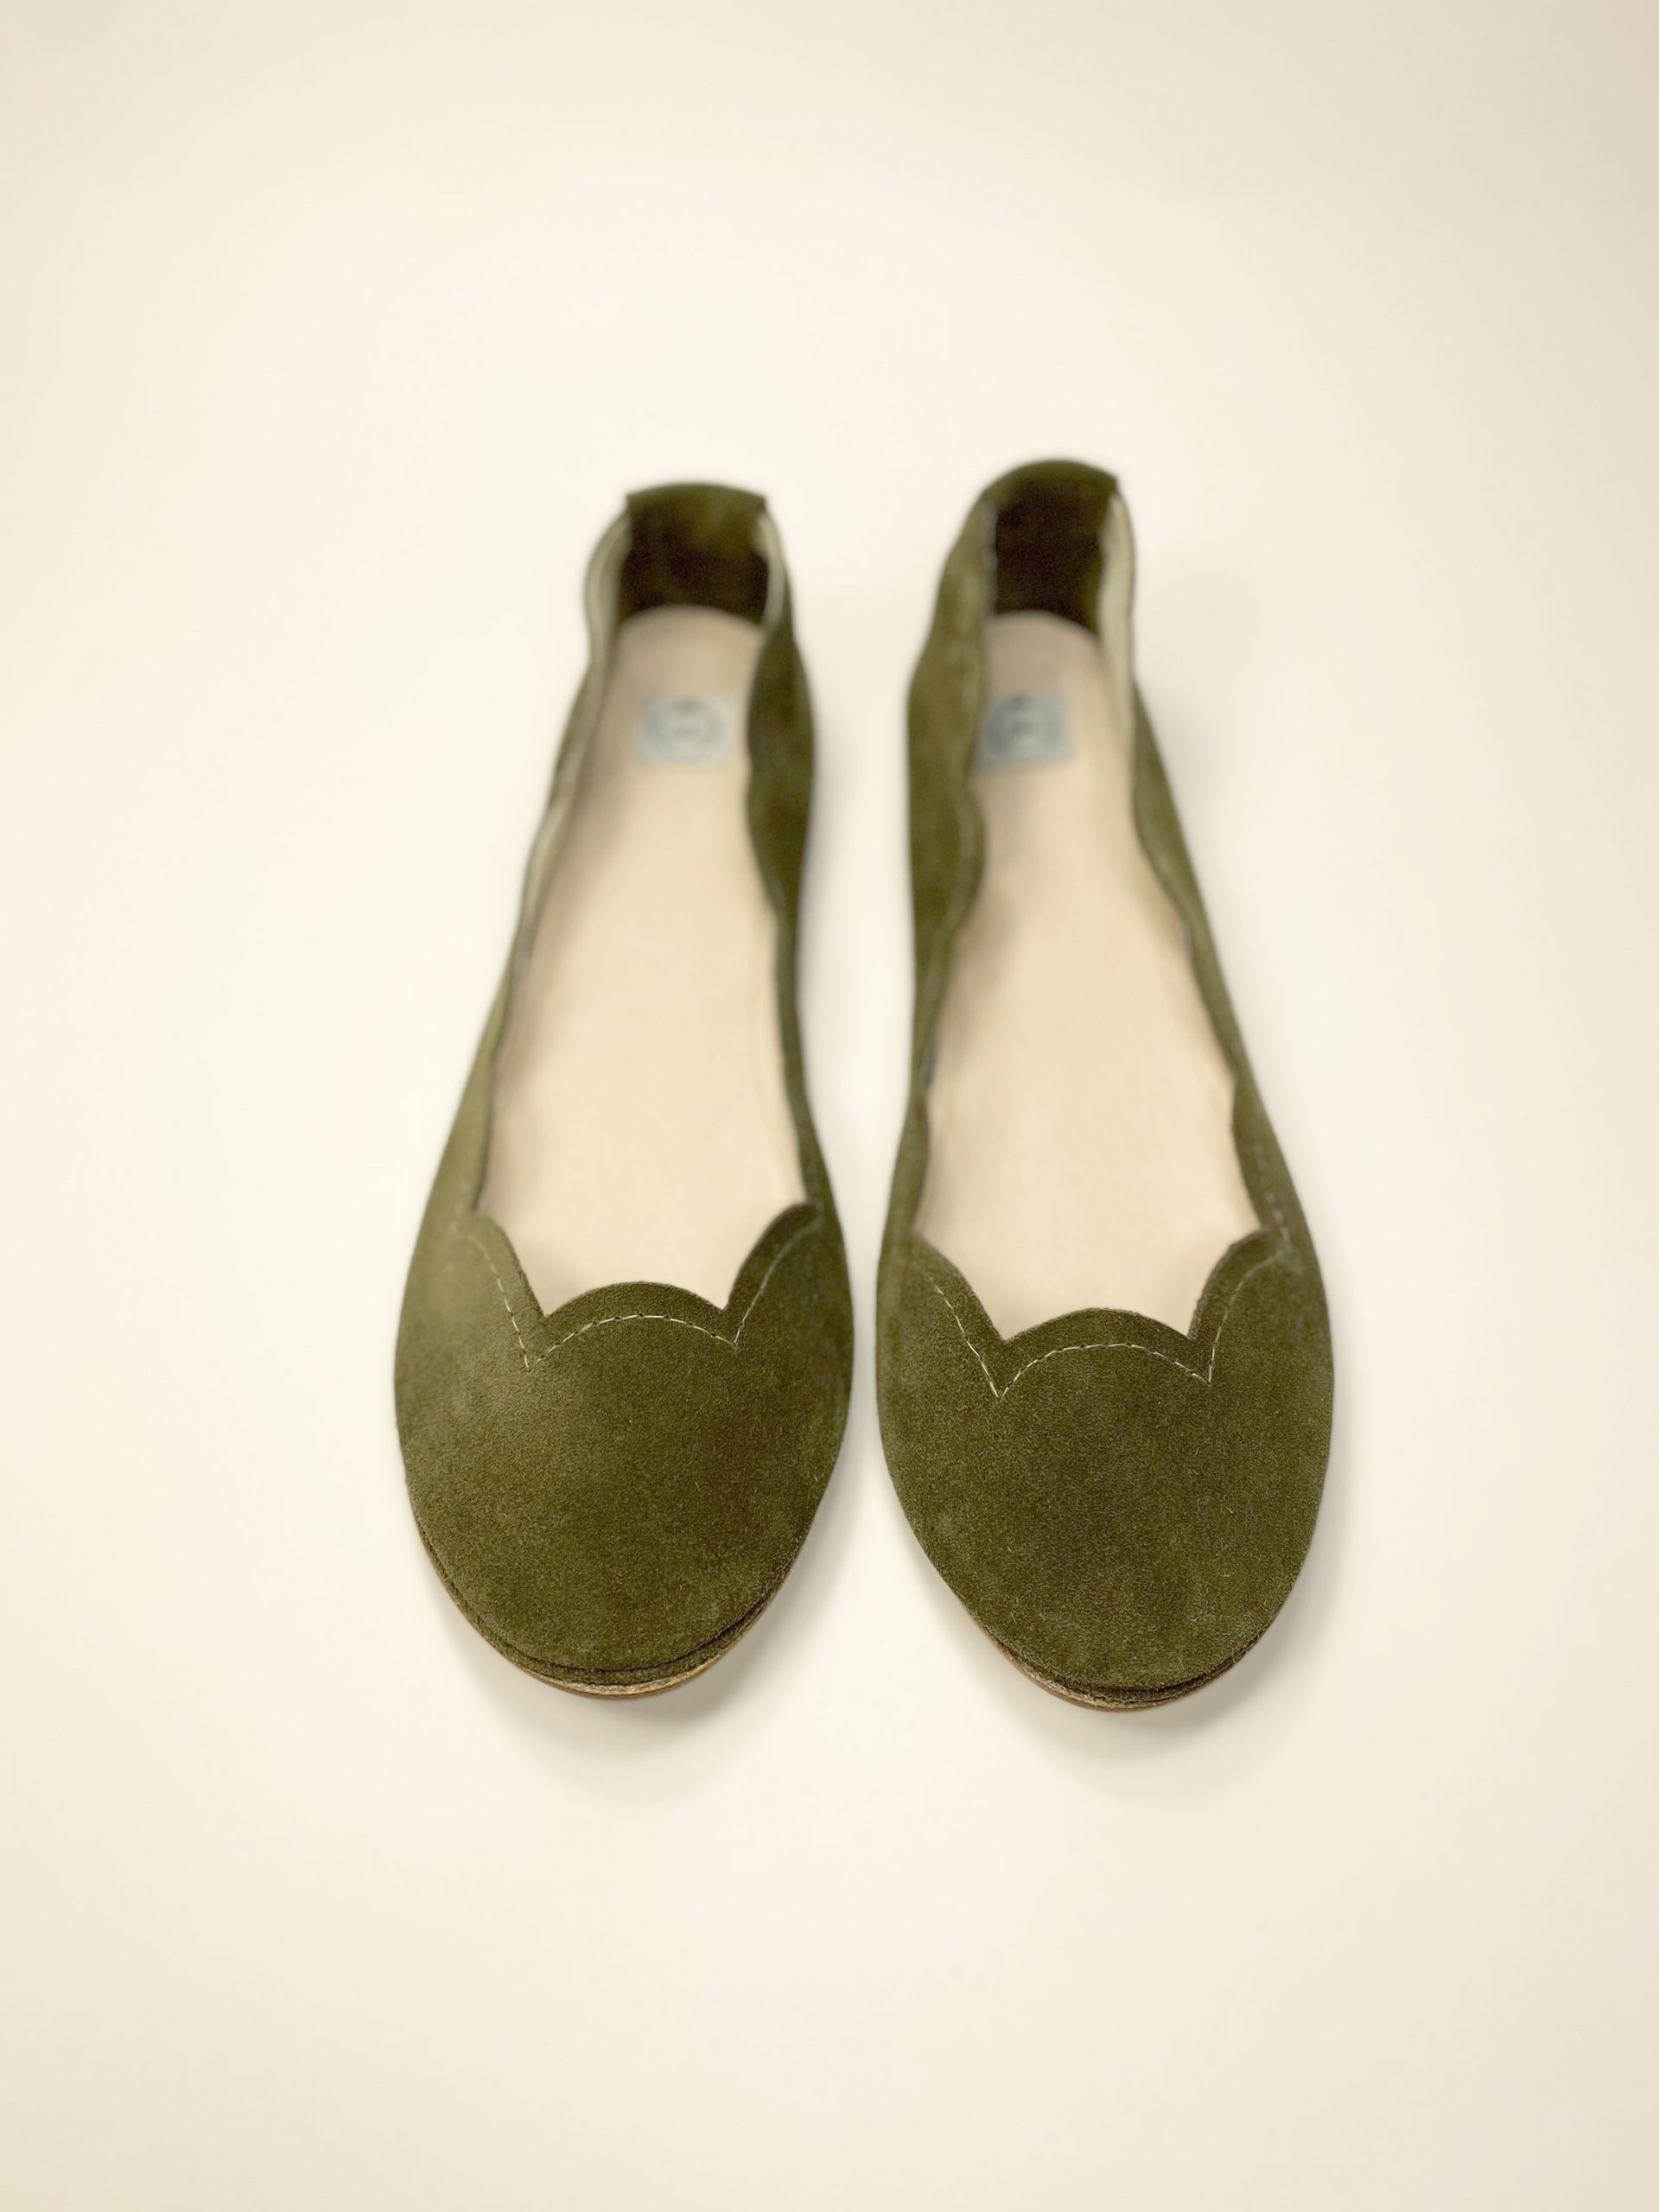 Ballet Flats Shoes in Olive Gree Italian Suede With Scalloped Edge